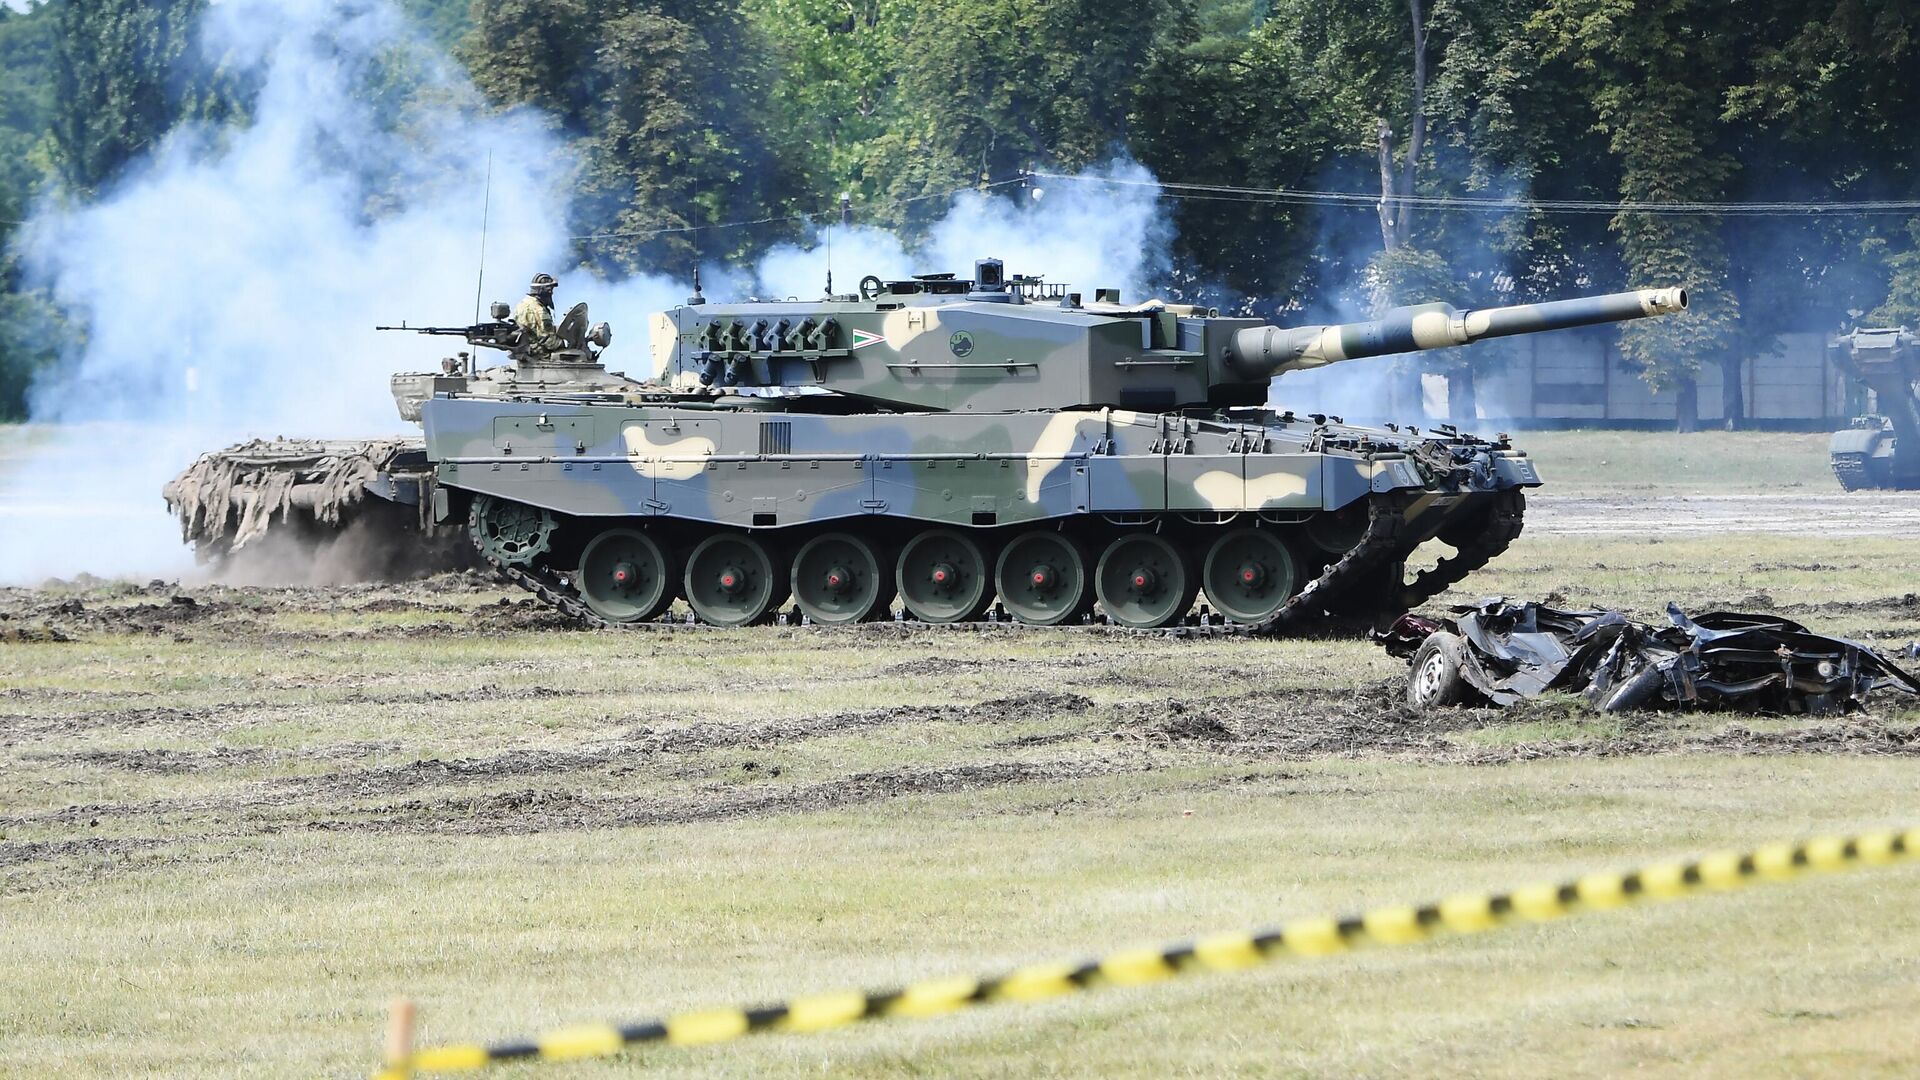 A Leopard 2/A4 battle tank rolls during a handover ceremony of tanks at the army base of Tata, Hungary, on July 24, 2020 - Sputnik International, 1920, 25.01.2023